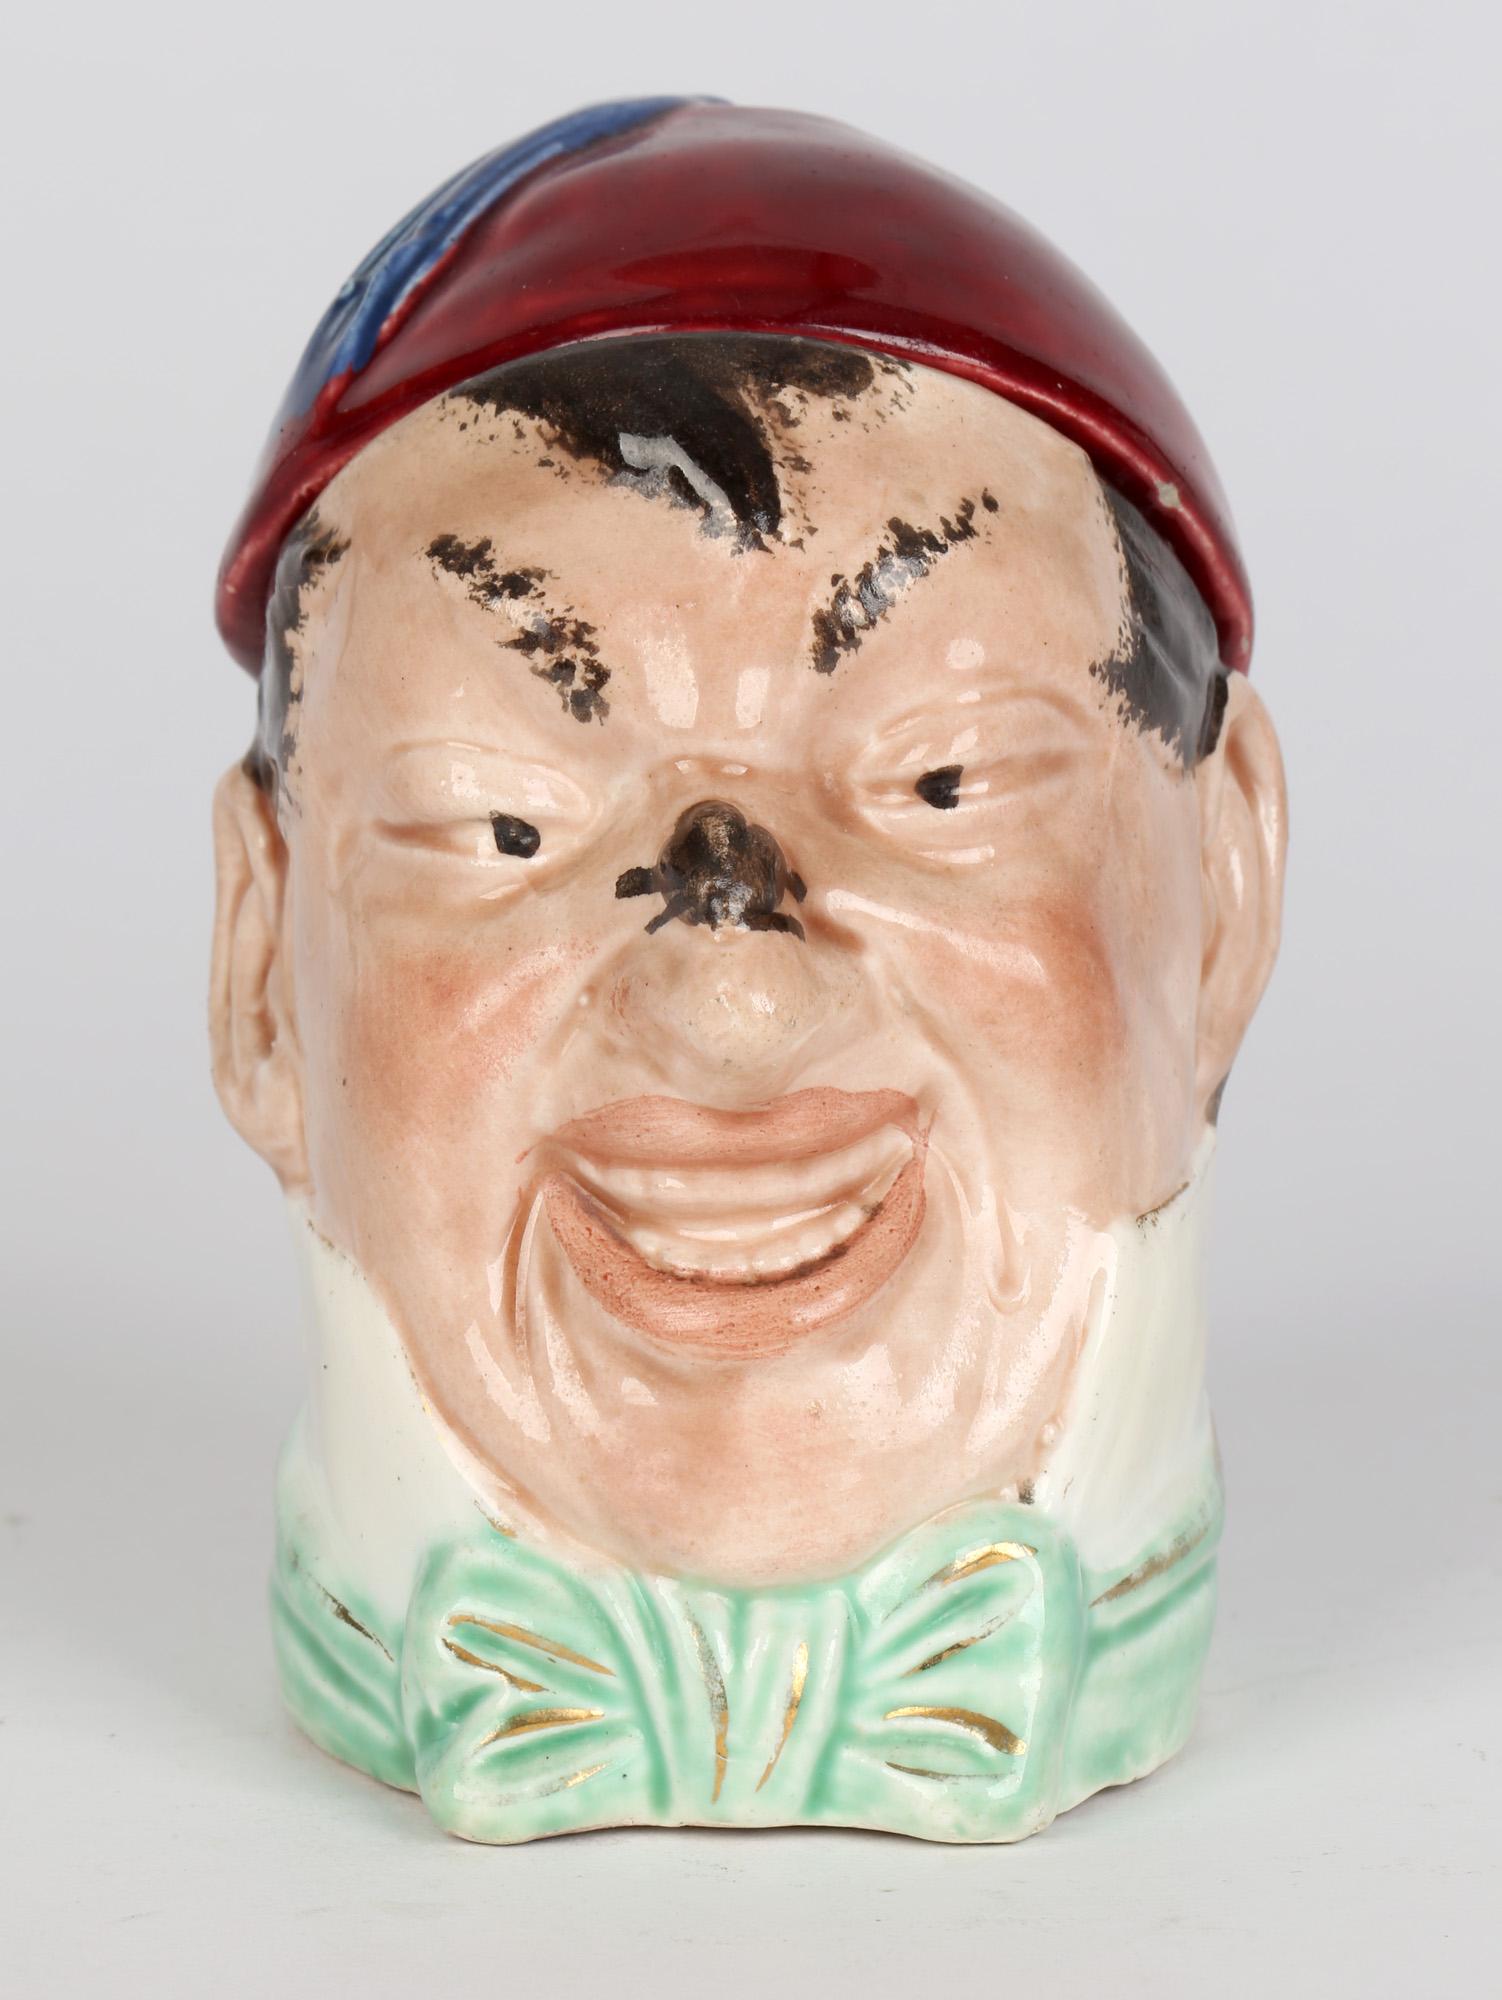 A delightful antique novelty Continental majolica pottery lidded character tobacco jar of a man wearing a fez type hat dating from the latter 19th century. The jar is modeled as the head of a man watching an insect perched on his nose. He is dressed